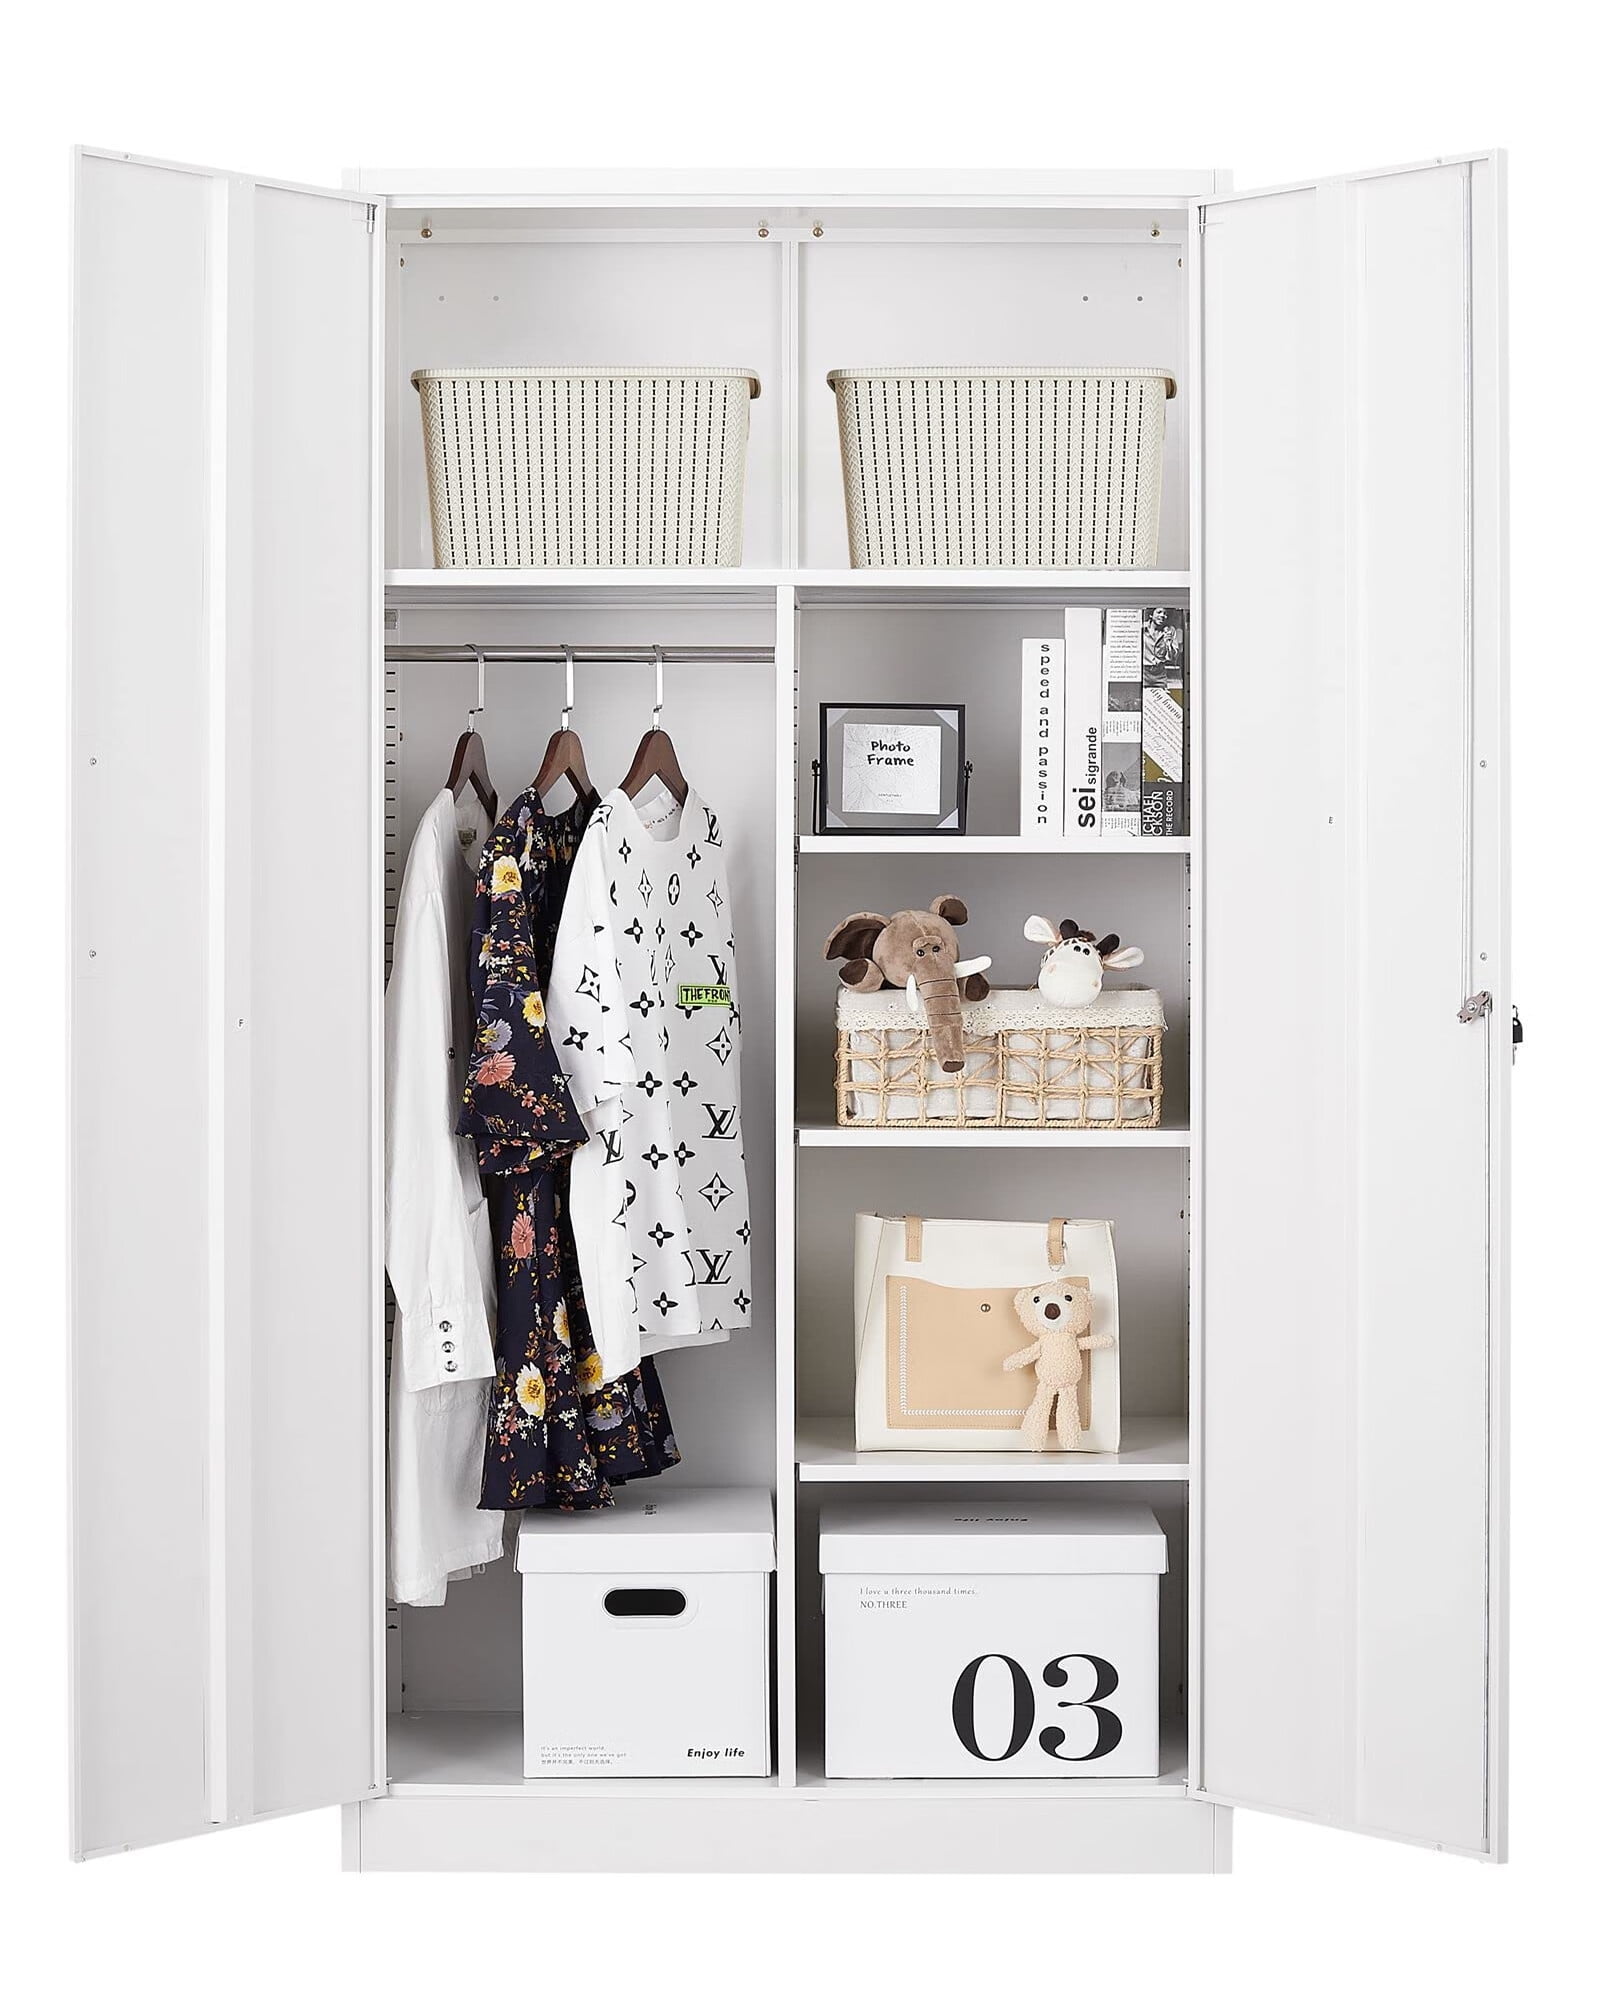 STANI Metal Storage Cabinet 72” Locking Metal Cabinets with 2 Adjustable Shelves Garage School Metal Cabinet with 4 Doors and Lock for Home Office 